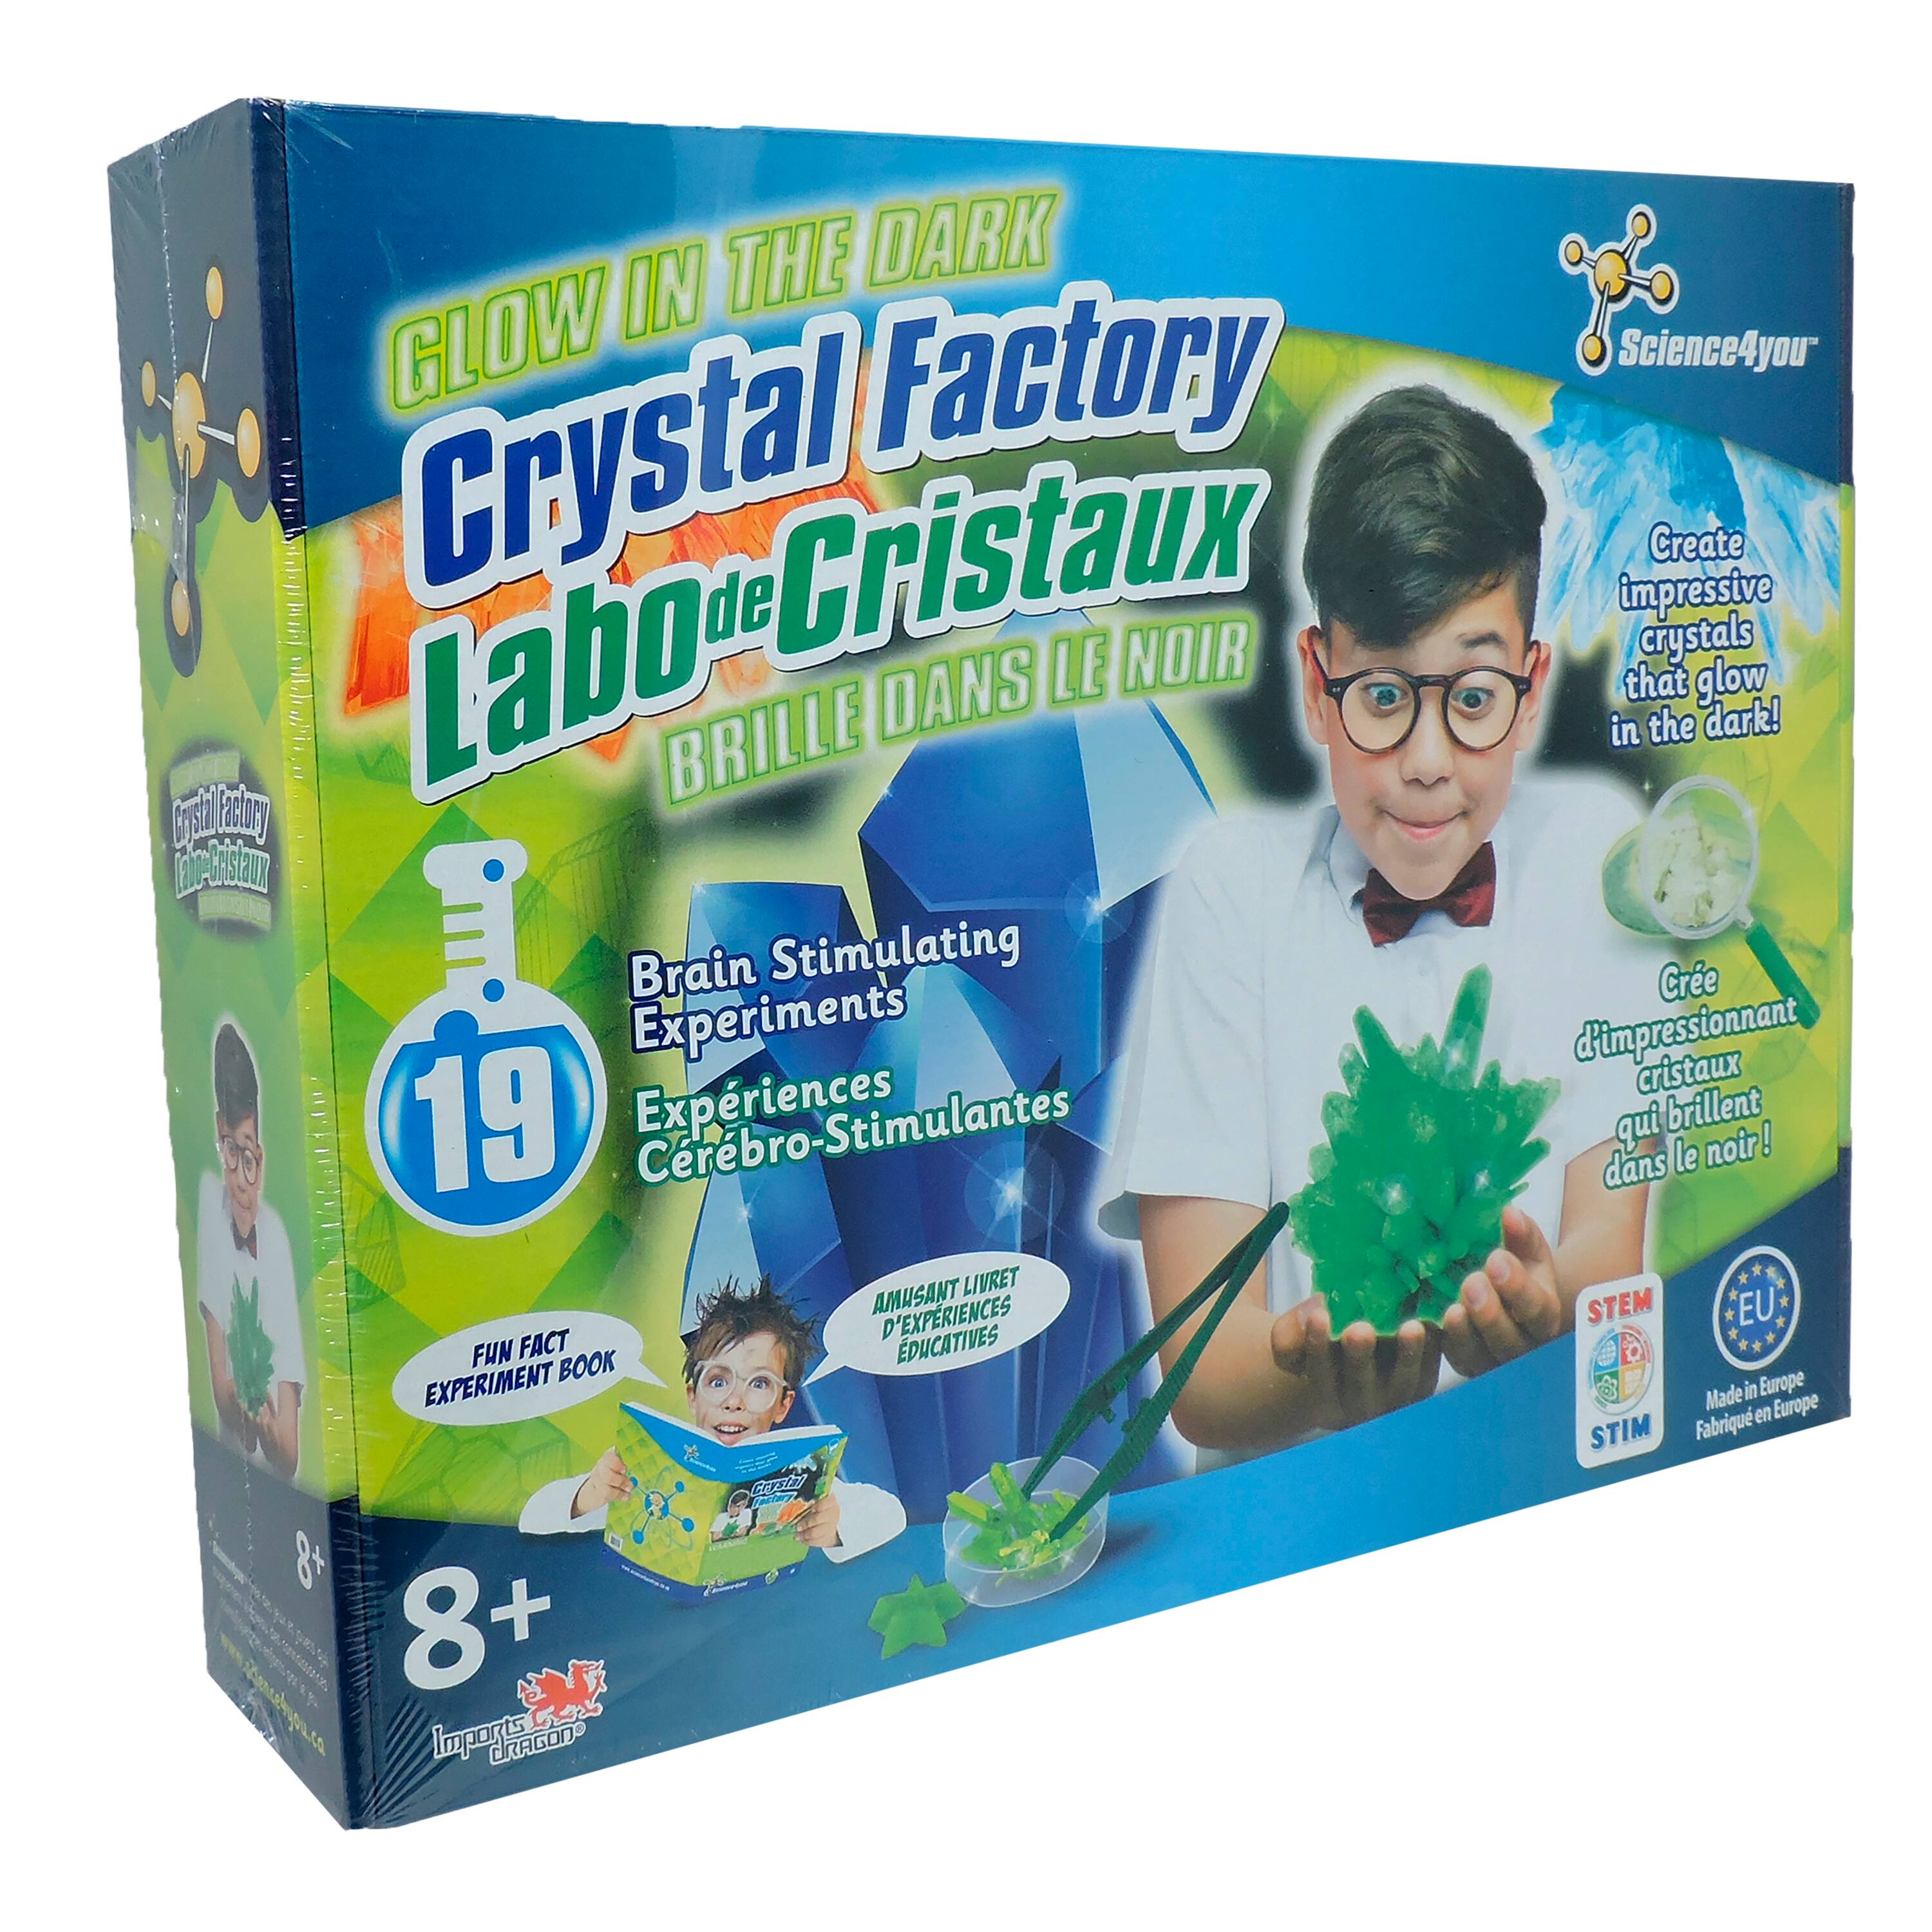 Science4you Crystal Factory Experiment Kit